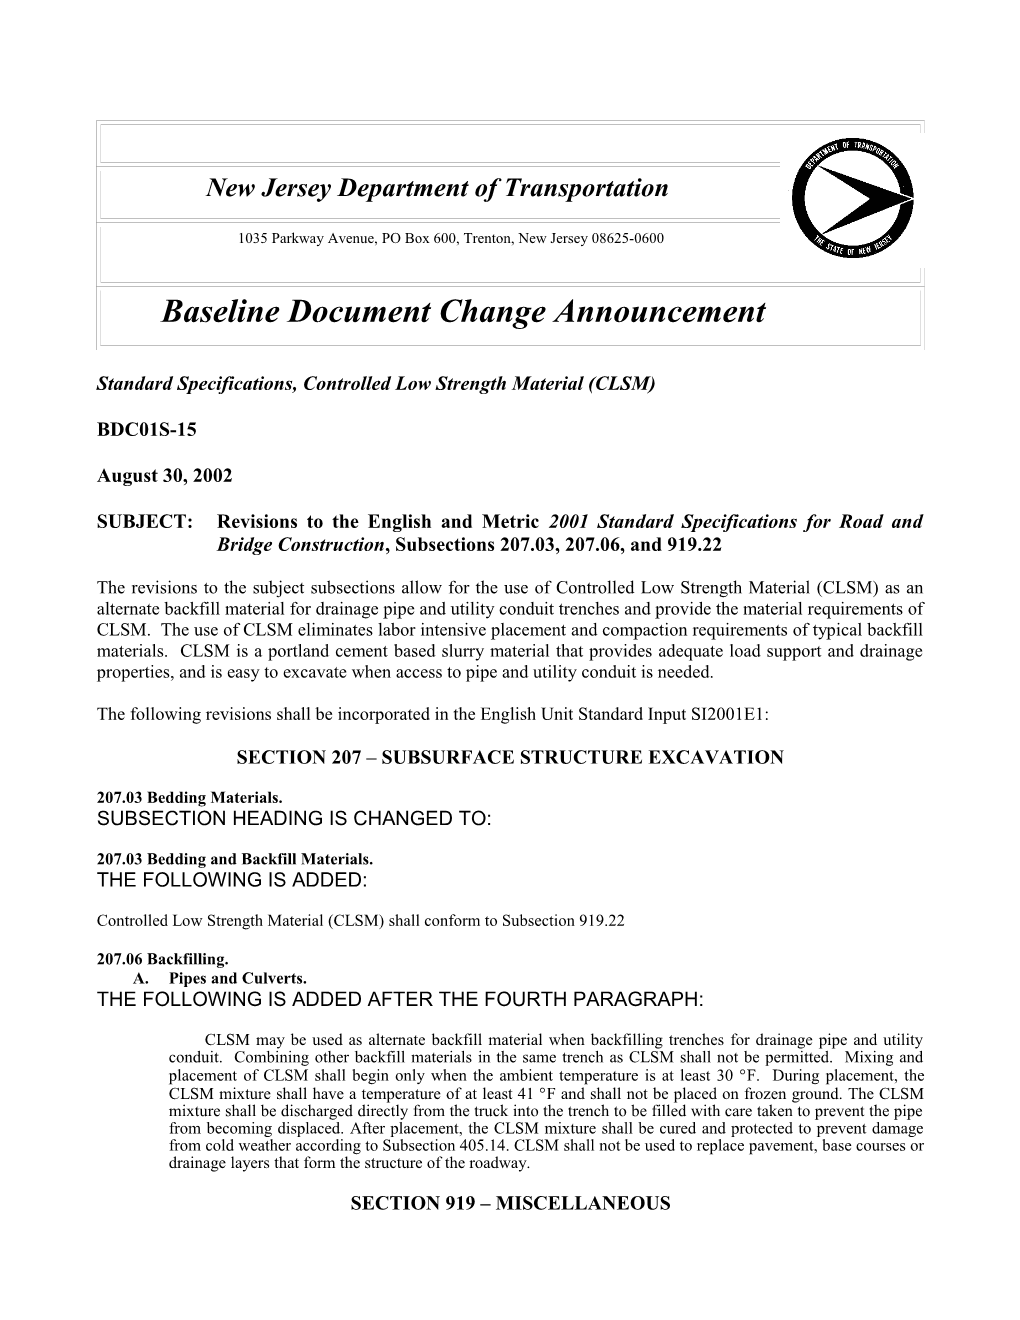 New Jersey Department of Transportation s1